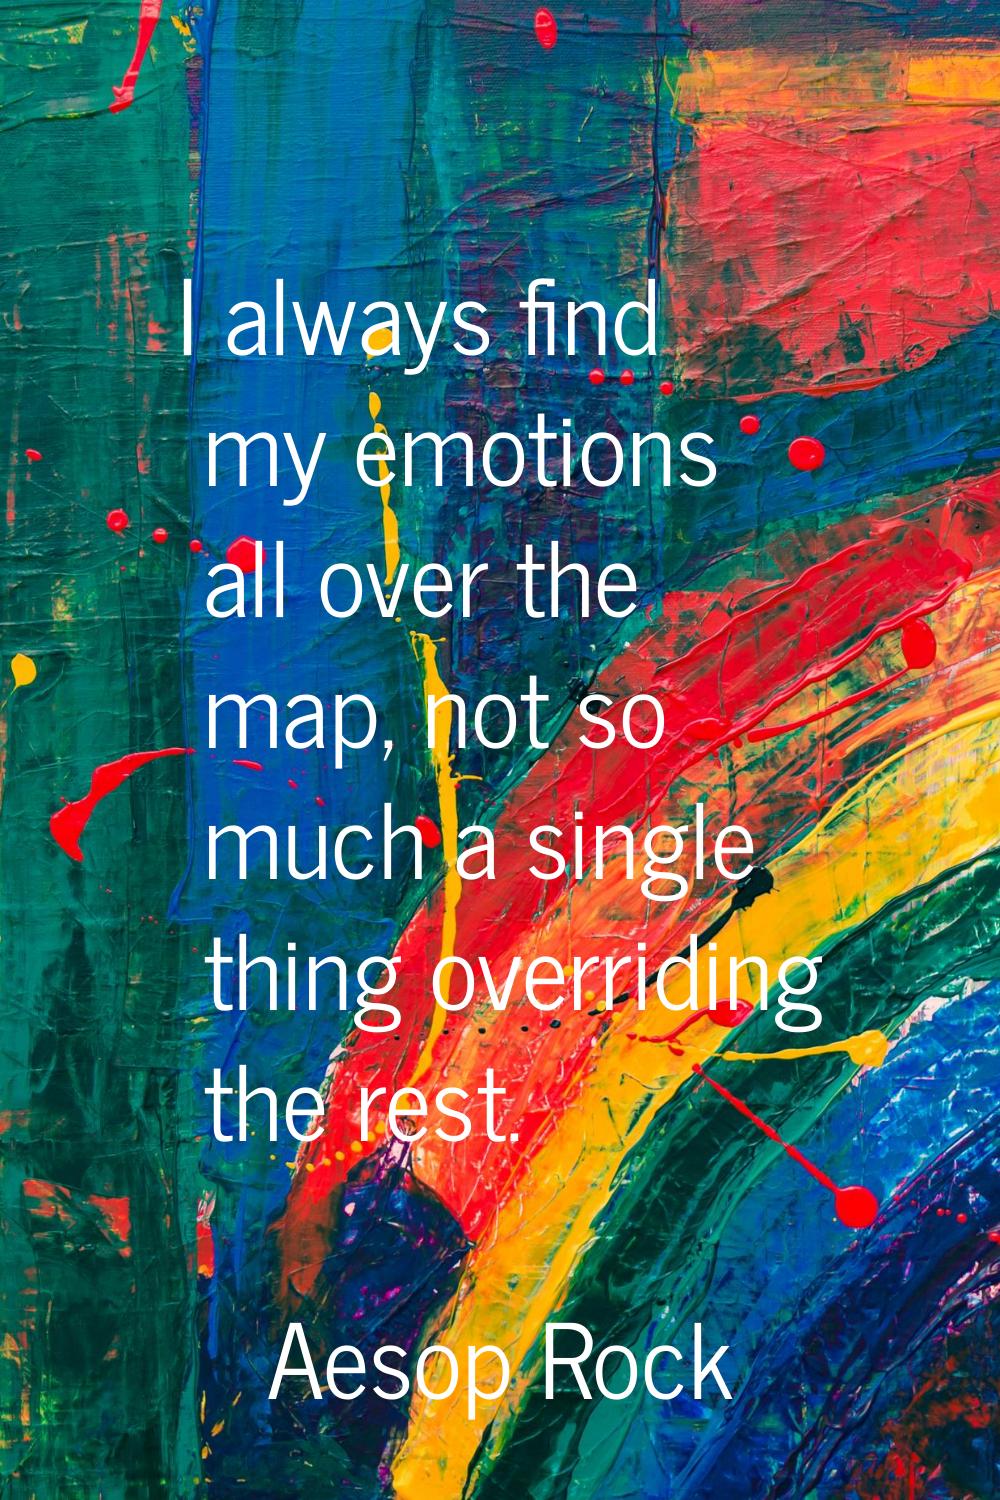 I always find my emotions all over the map, not so much a single thing overriding the rest.